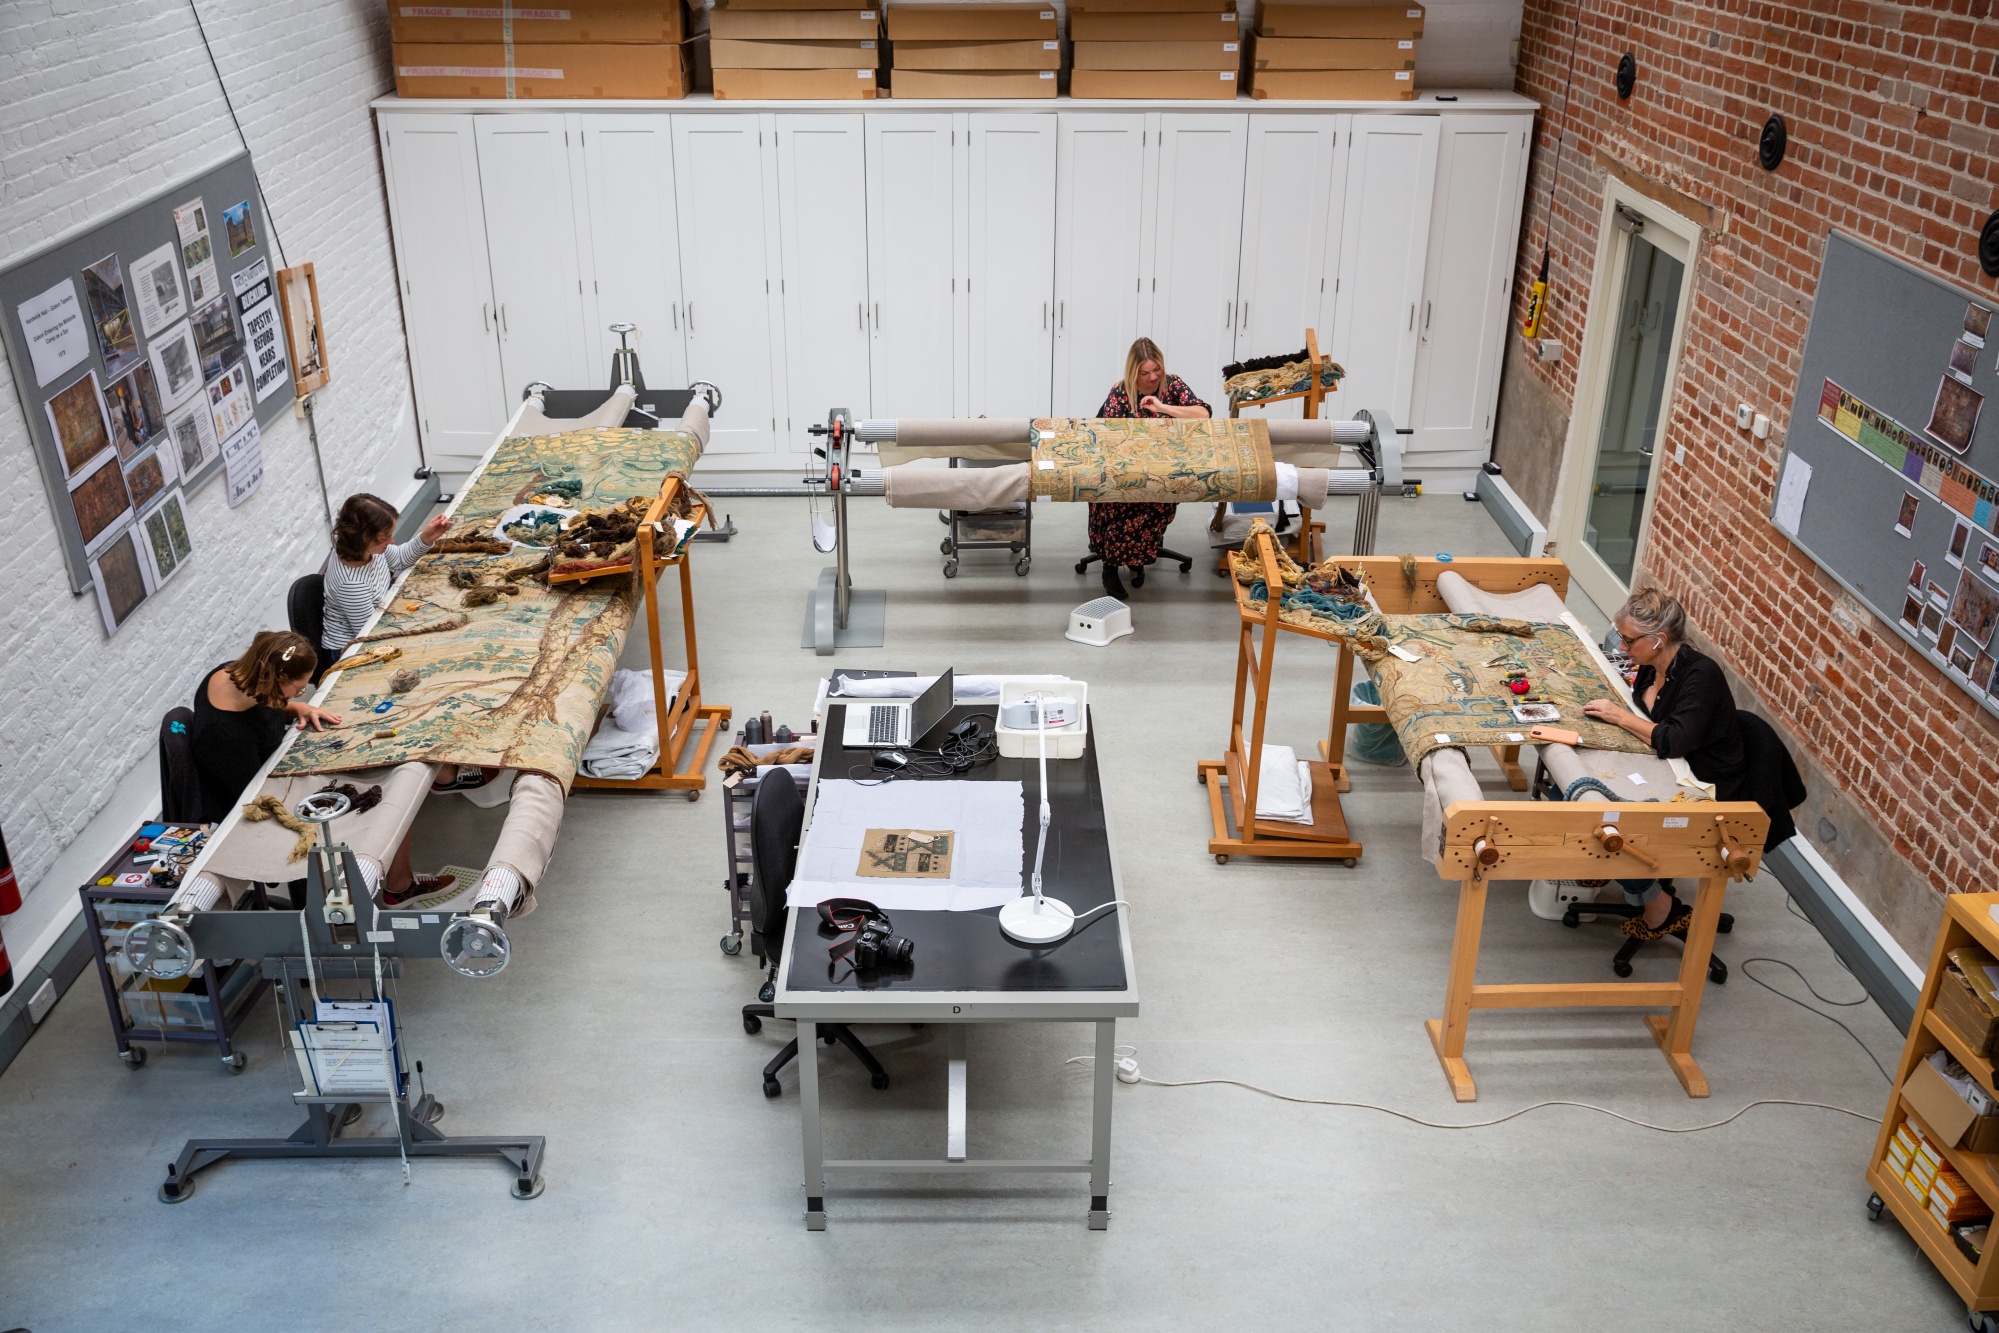 10. Conservators at the National Trust's Textile Conservation Studio 13th Gideon tapestry. National Trust Images_James Dobson.jpg